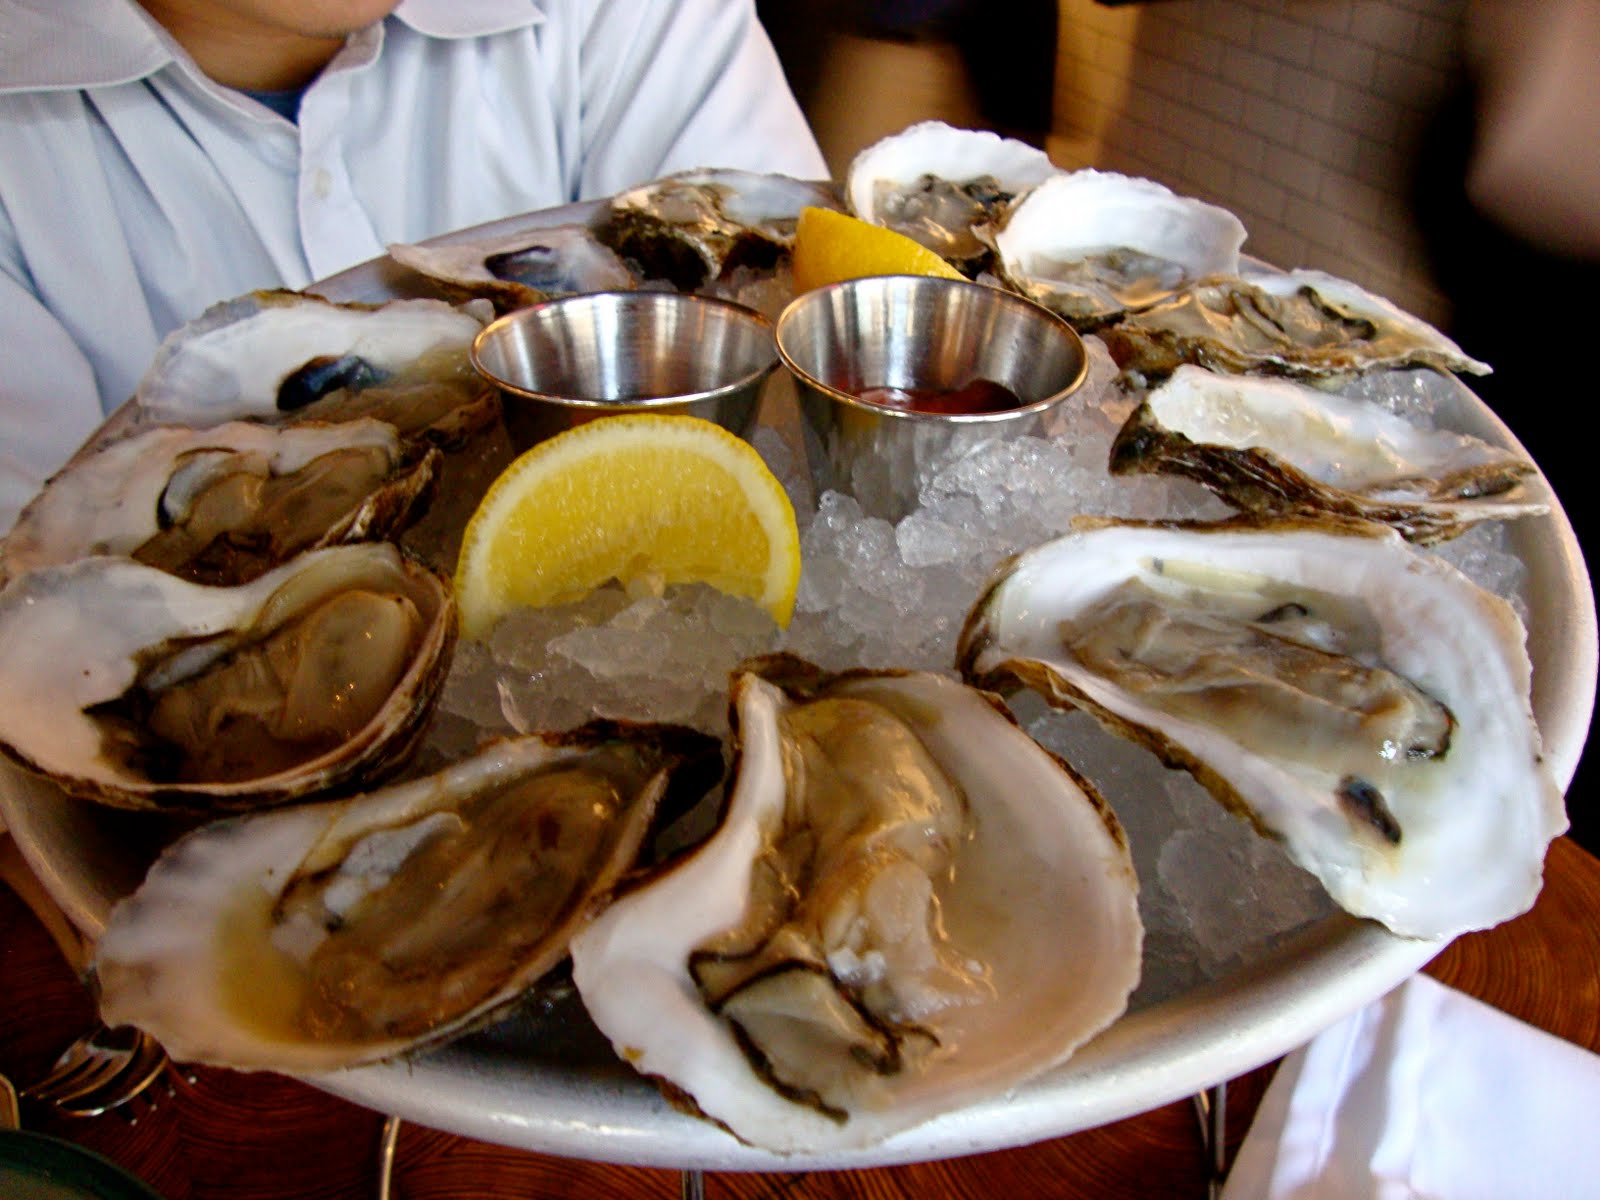 Raw Oysters: Yay or Nay? | From Lab To Kitchen